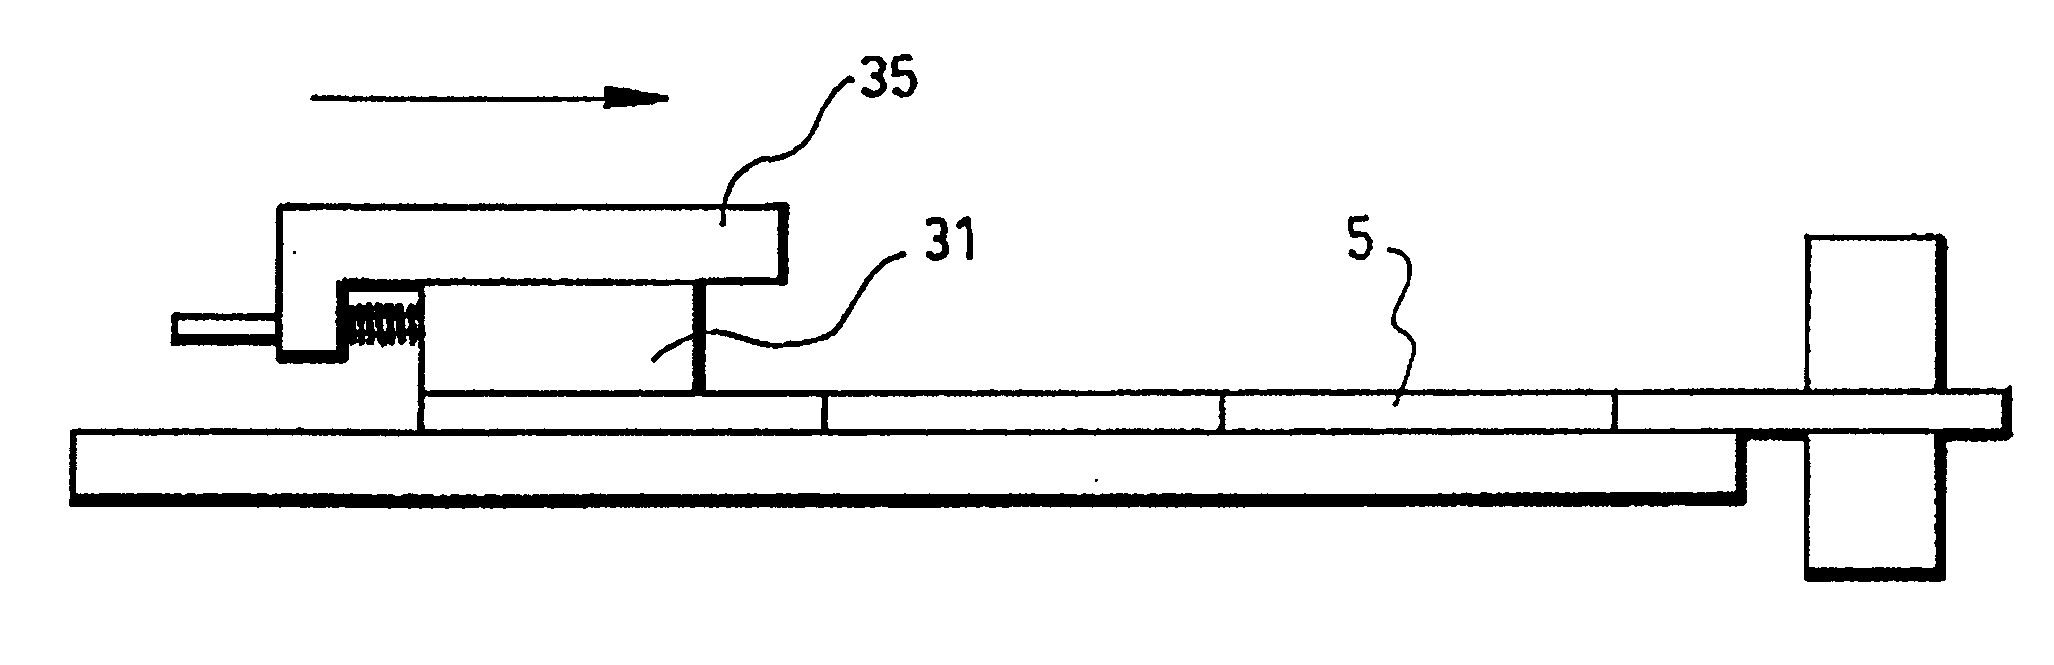 Wood flooring for use in making trailer and container floors, and method and apparatus for making the same